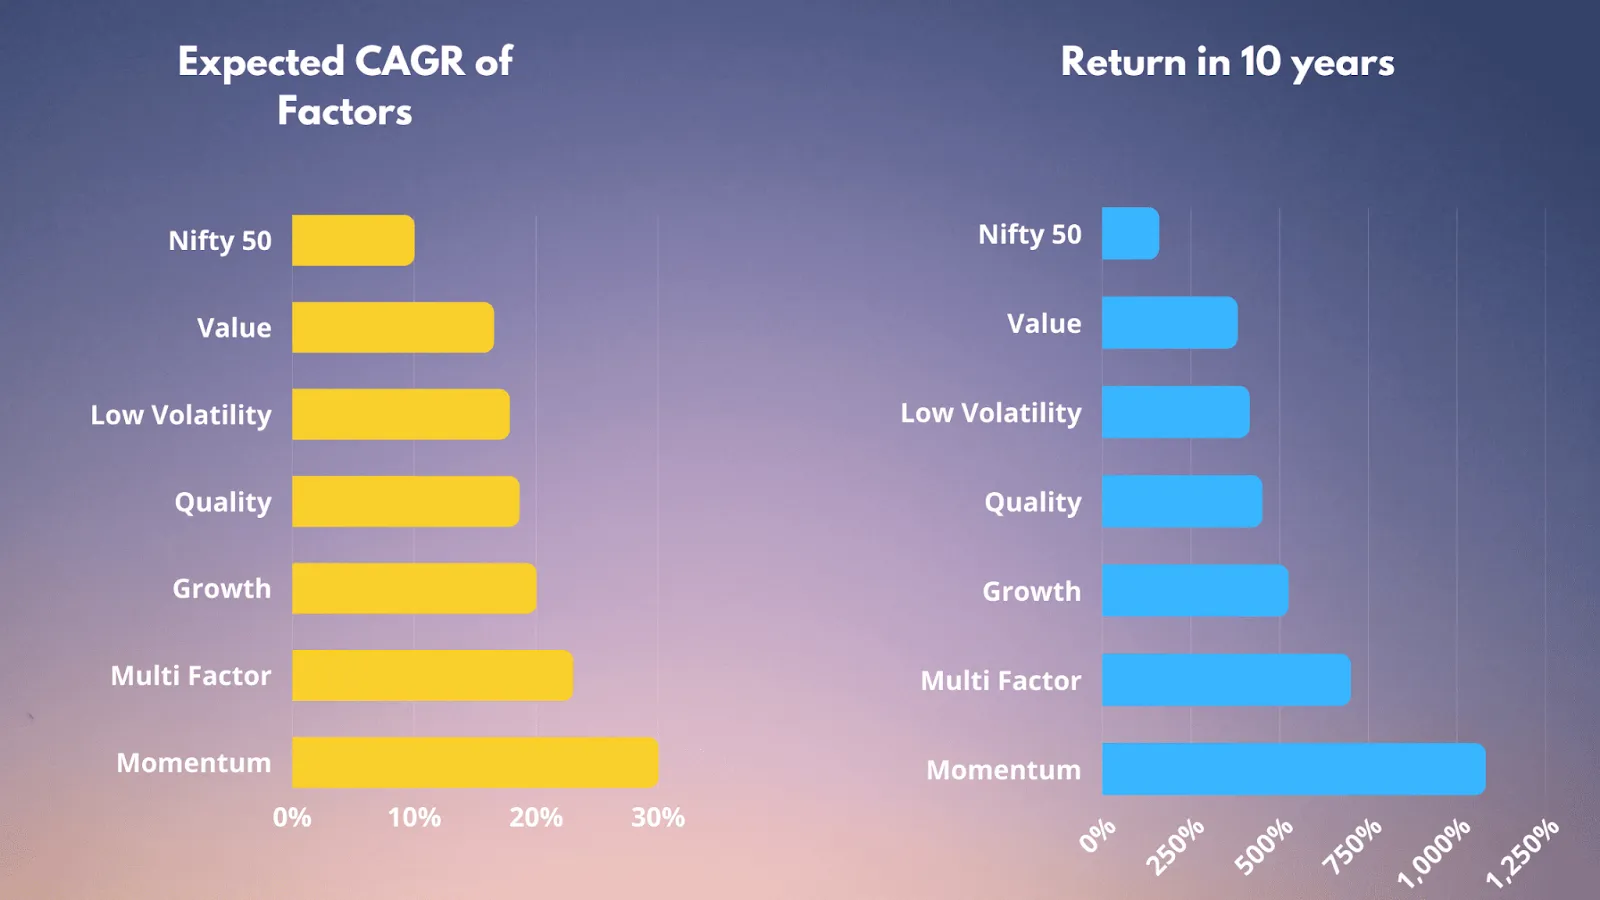 Expected CAGR of Factors